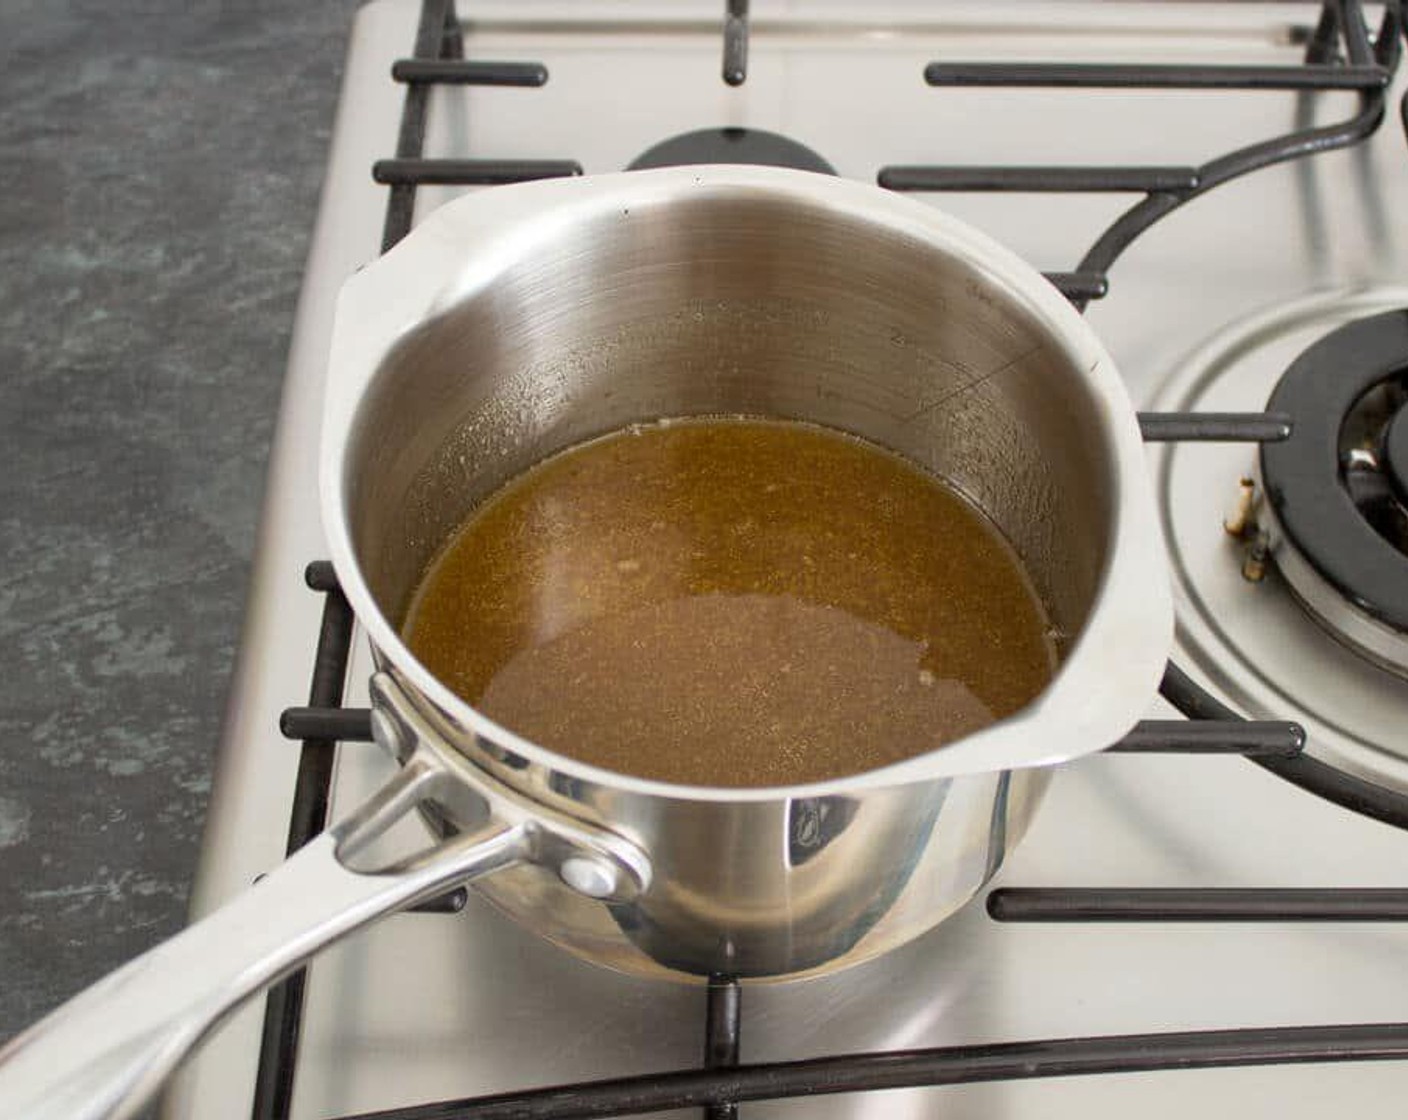 step 4 In a medium saucepan, gently melt together the Brown Sugar (1/2 cup), Unsalted Butter (1/2 cup), and Golden Syrup (1/4 cup) over a medium heat. Stir until the sugar is dissolved, then remove from the heat.